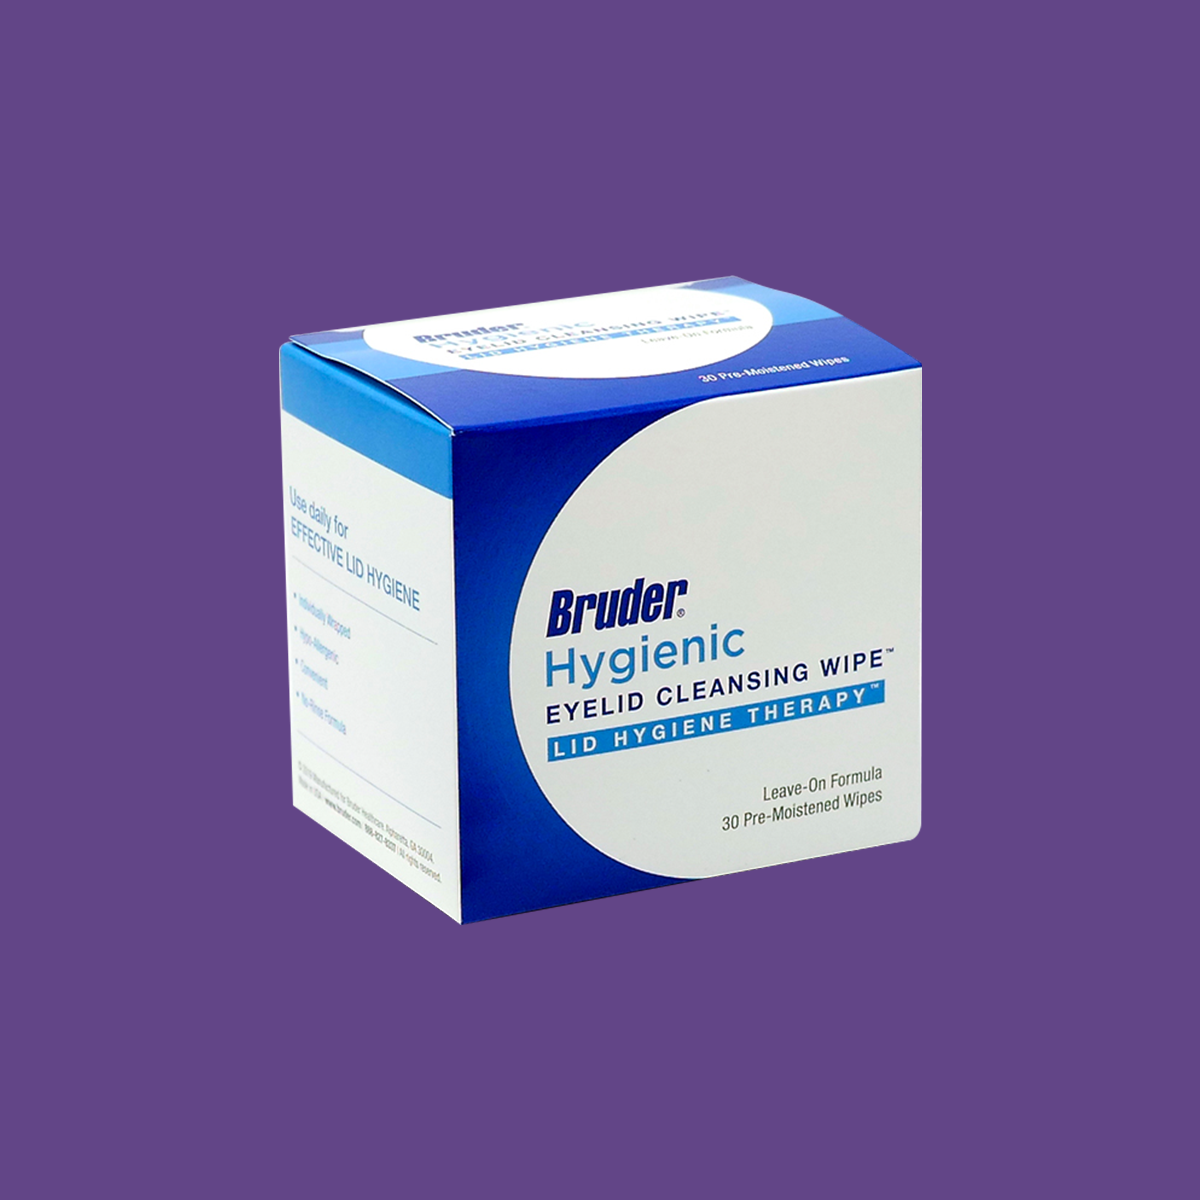 Bruder Hygienic Eyelid Cleansing Wipes - 30 Pre-Moistened Wipes